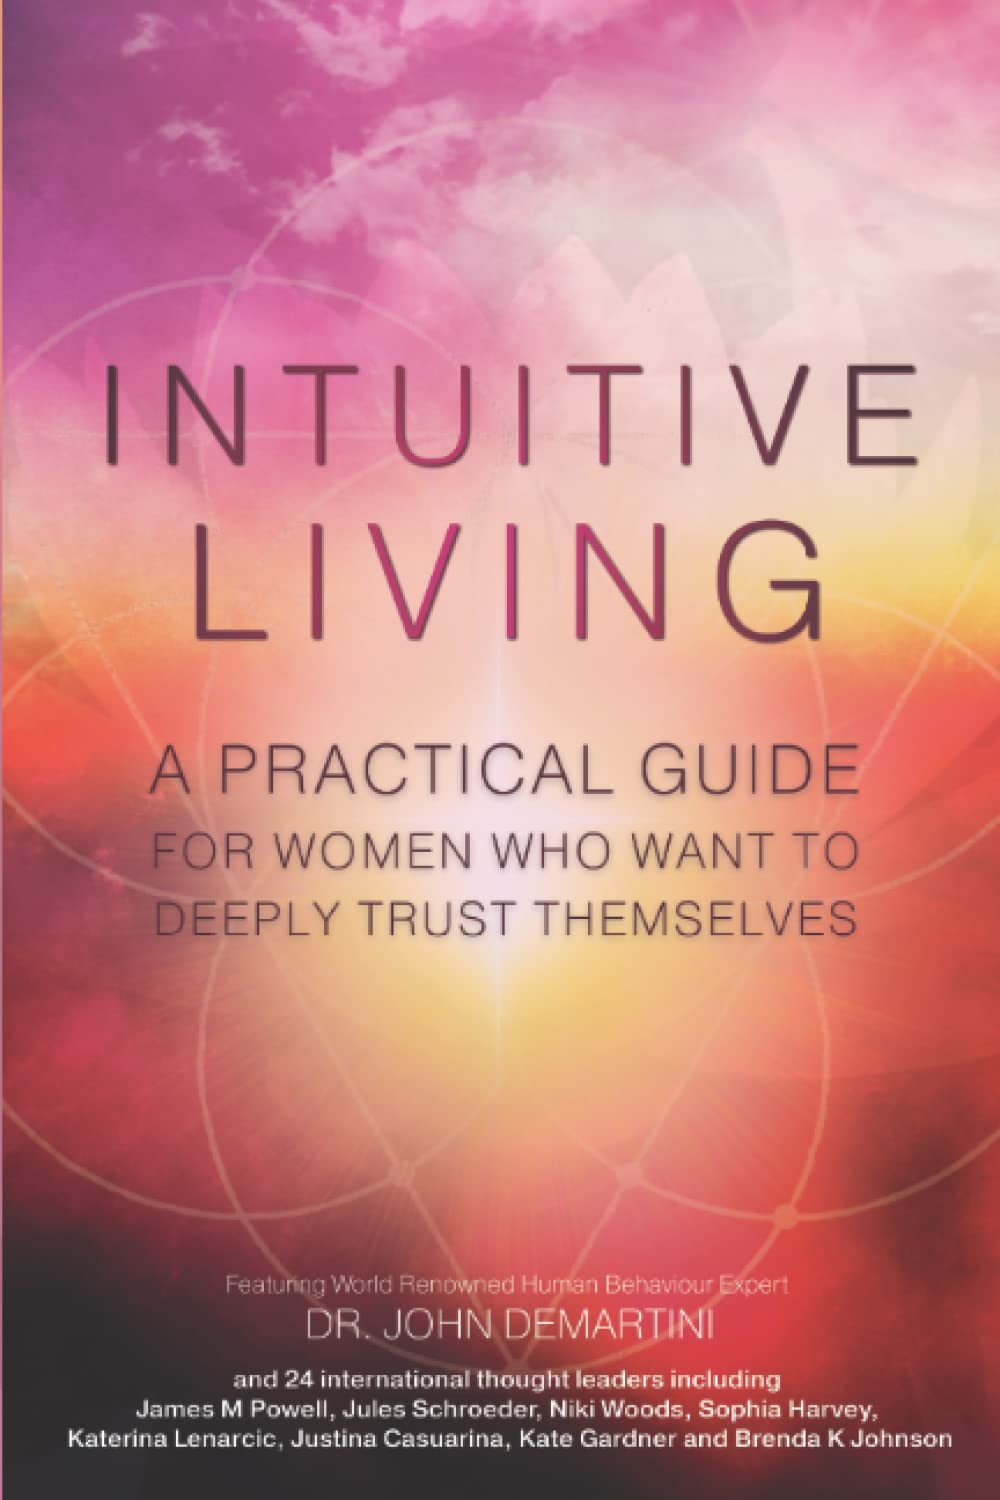 INTUITIVE LIVING: A practical guide for women who want to deeply trust themselves SureShot Books